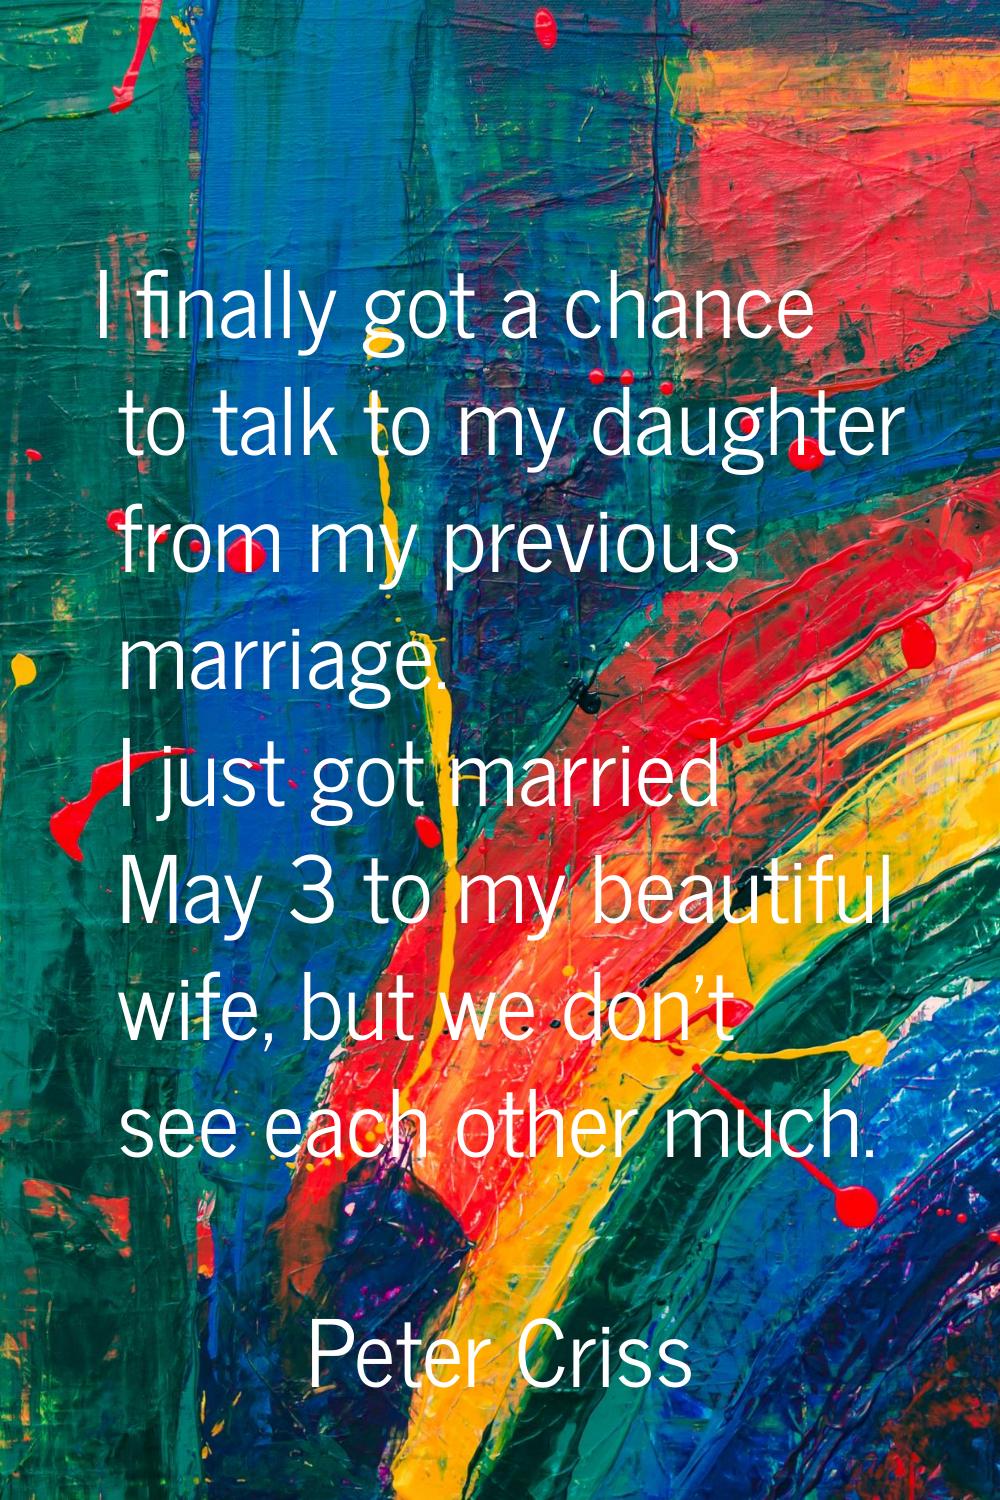 I finally got a chance to talk to my daughter from my previous marriage. I just got married May 3 t